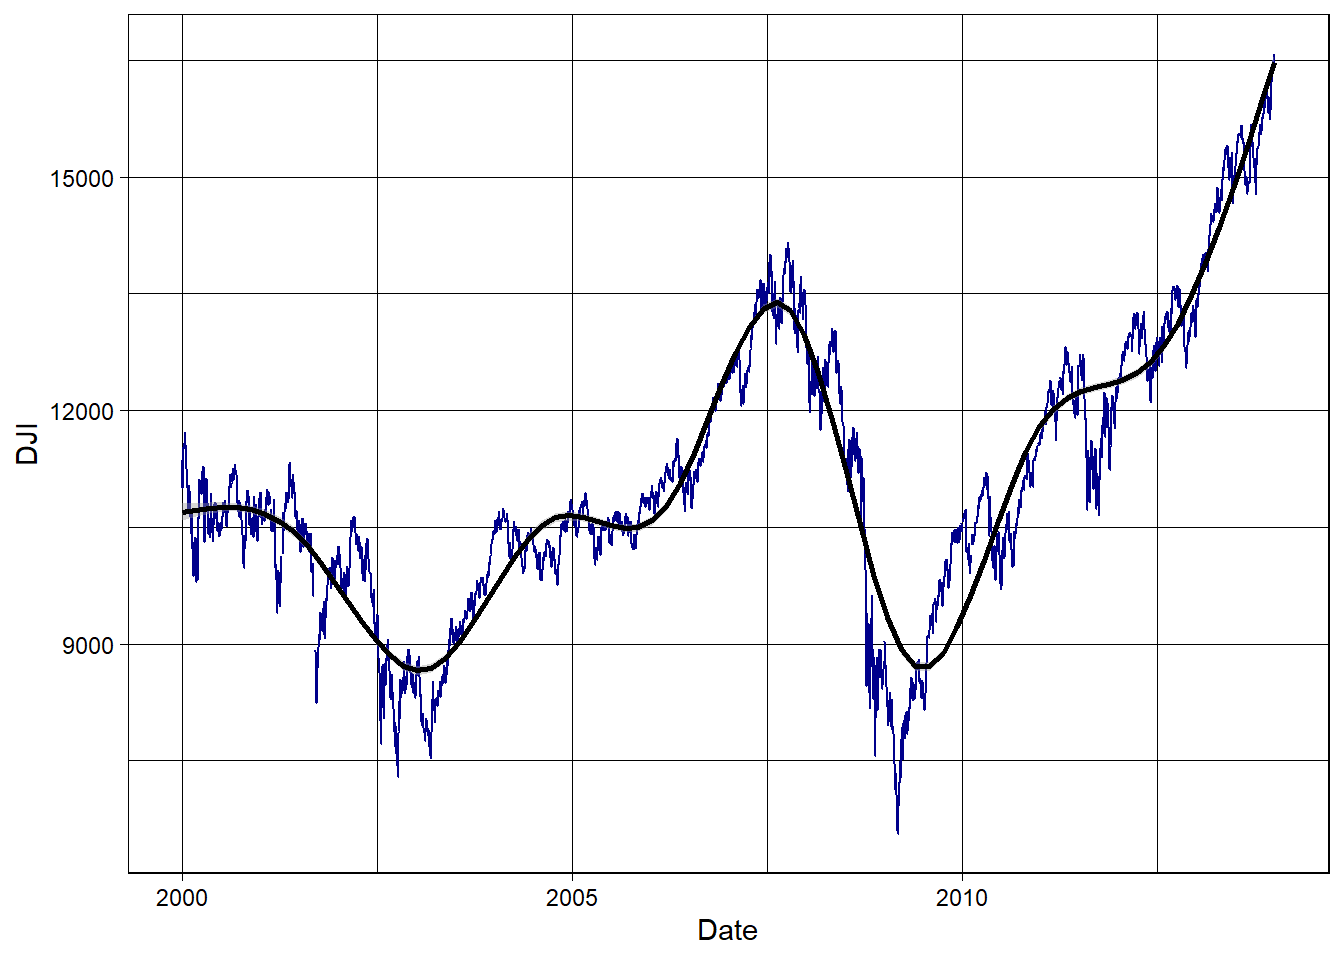 Stock Series Plot with Smooth Curve